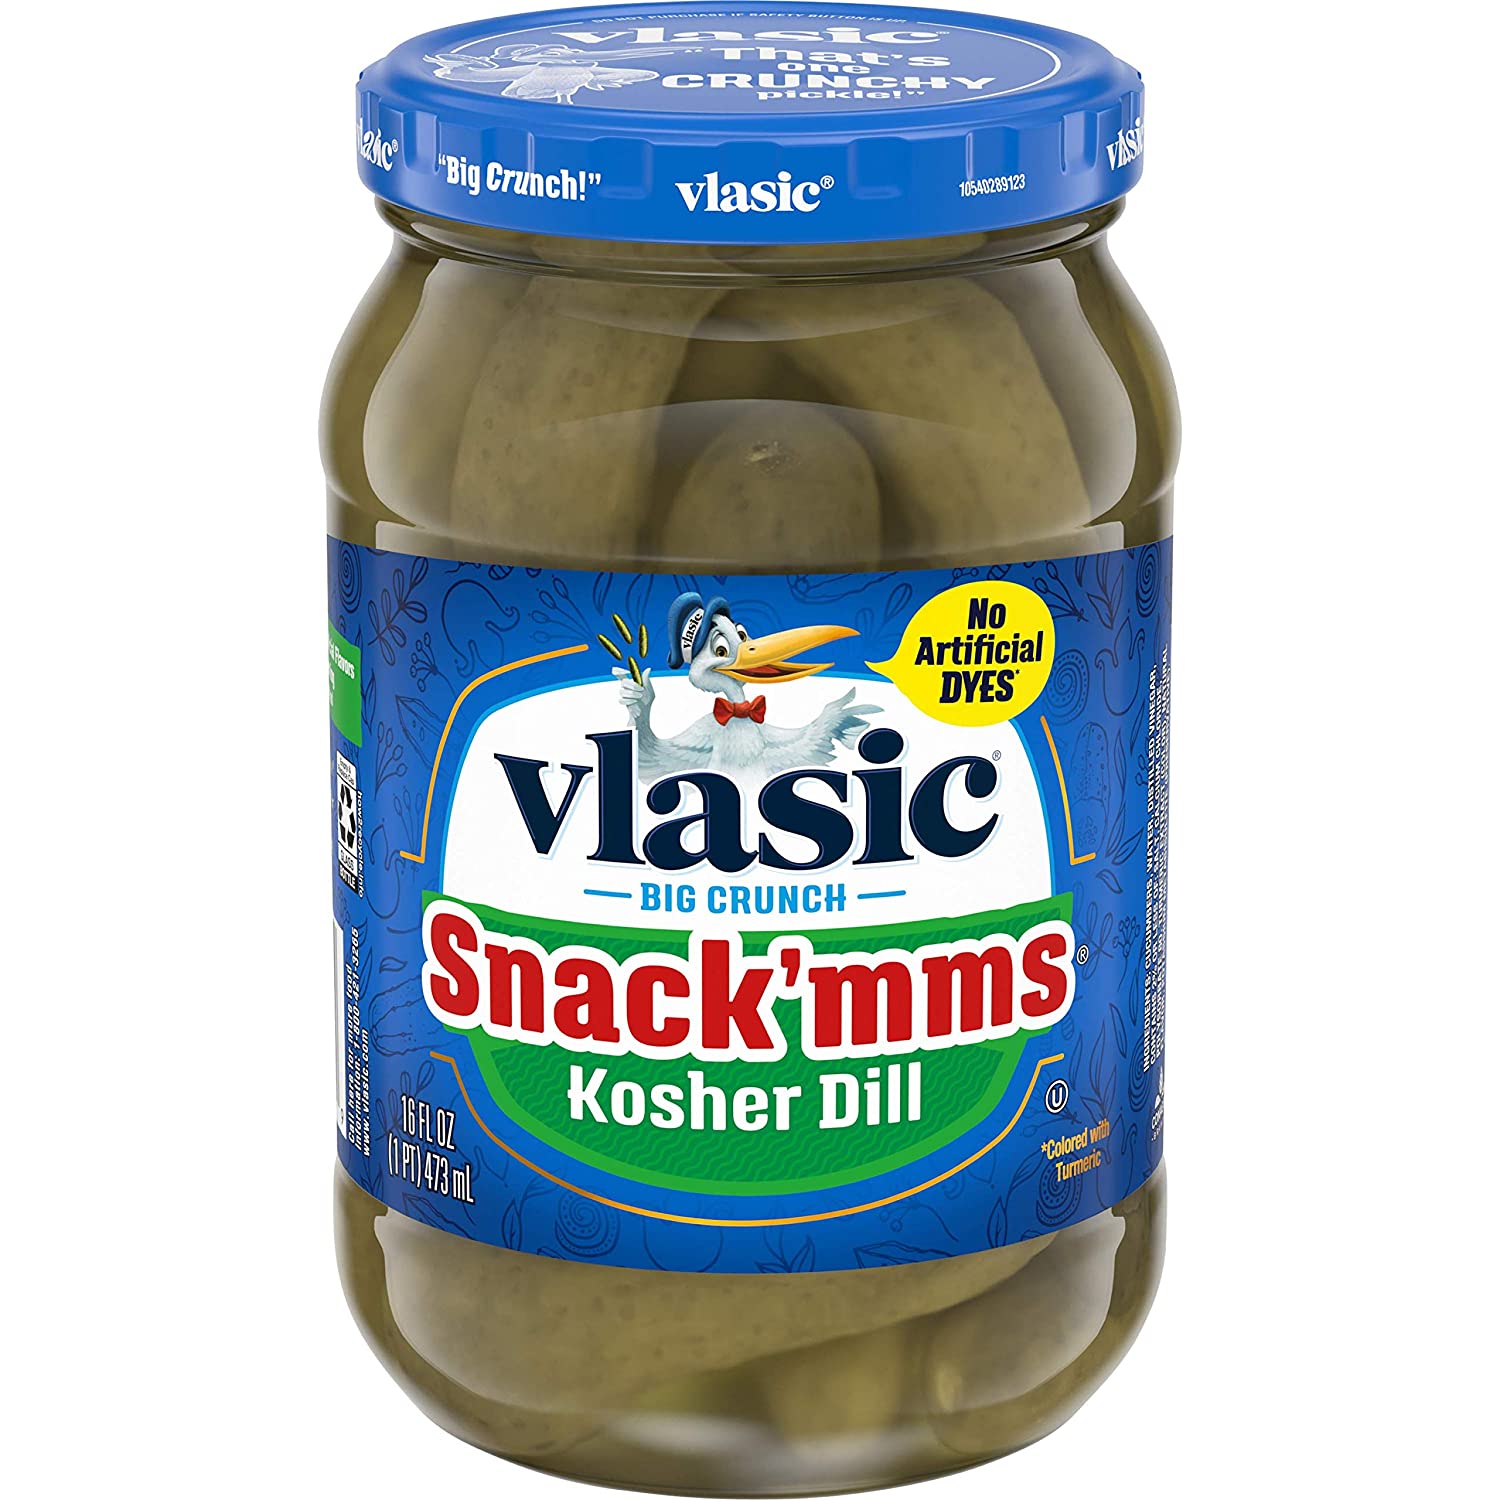 6-Pack 16-Oz Vlasic Big Crunch Snack'mms Kosher Dill Mini Pickles $10.87 ($1.81 Each) w/ S&S + Free Shipping w/ Prime or on $25+